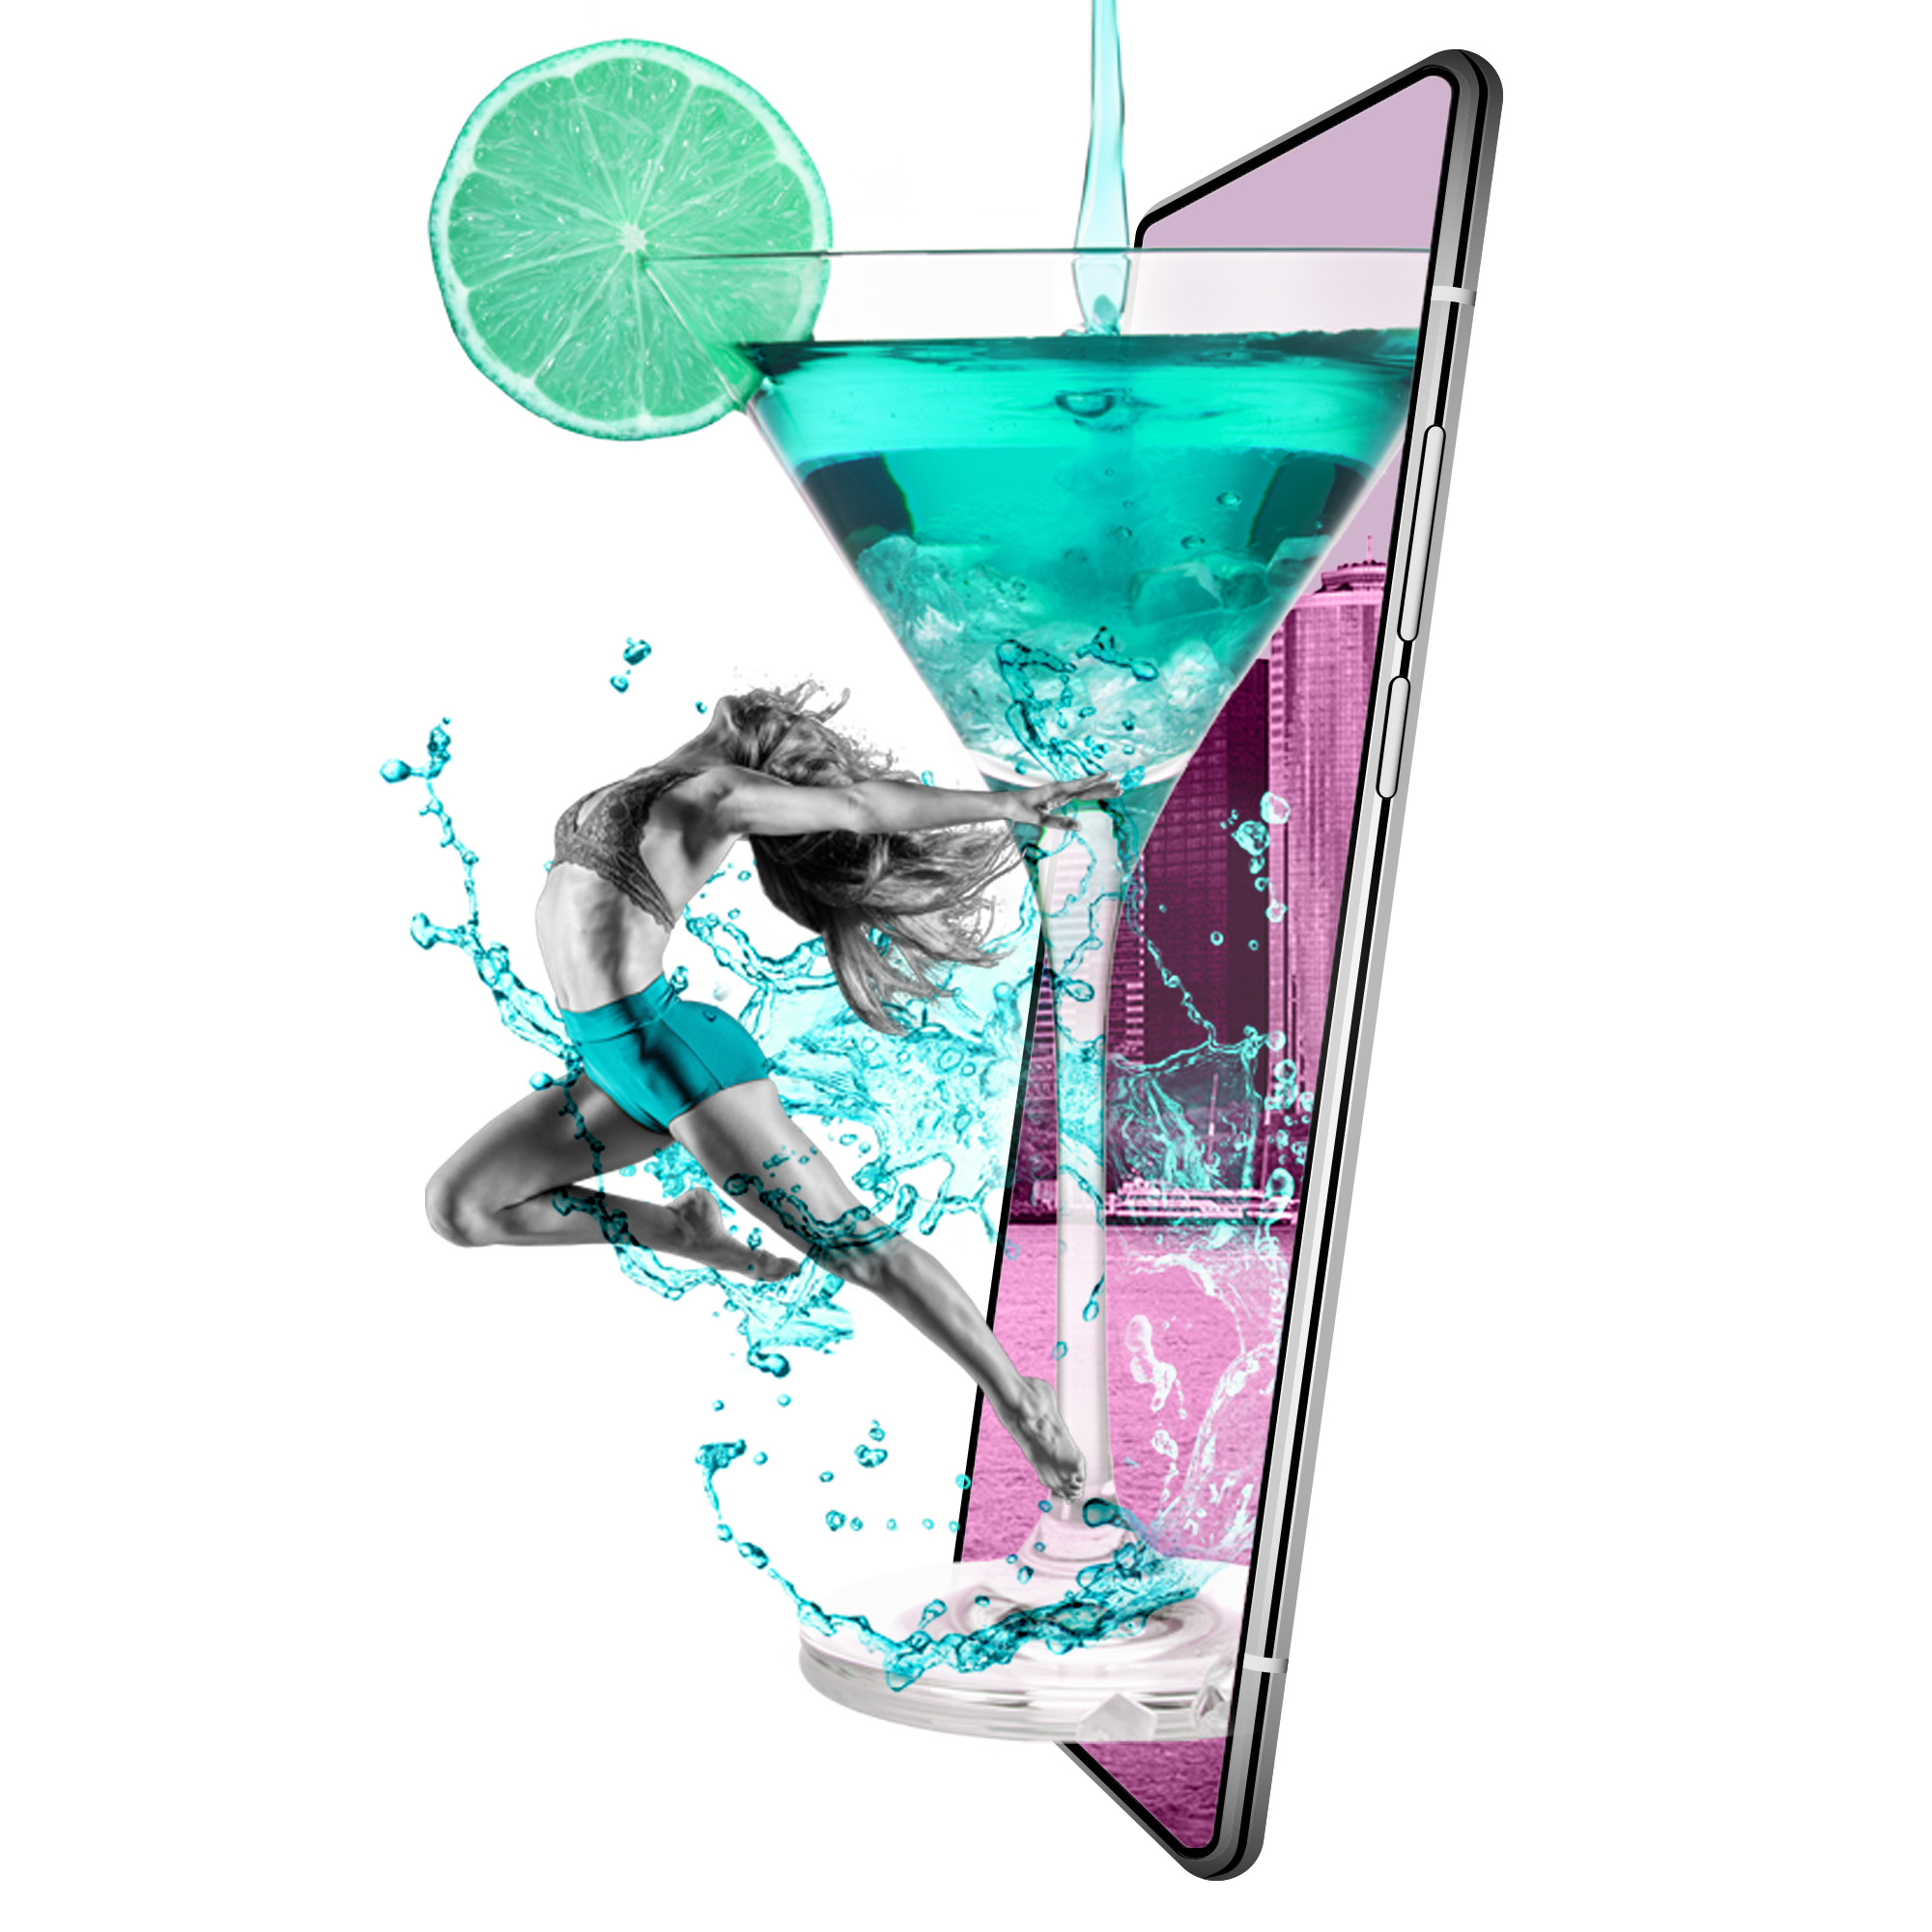 Girl jumping out of a phone with martini glass